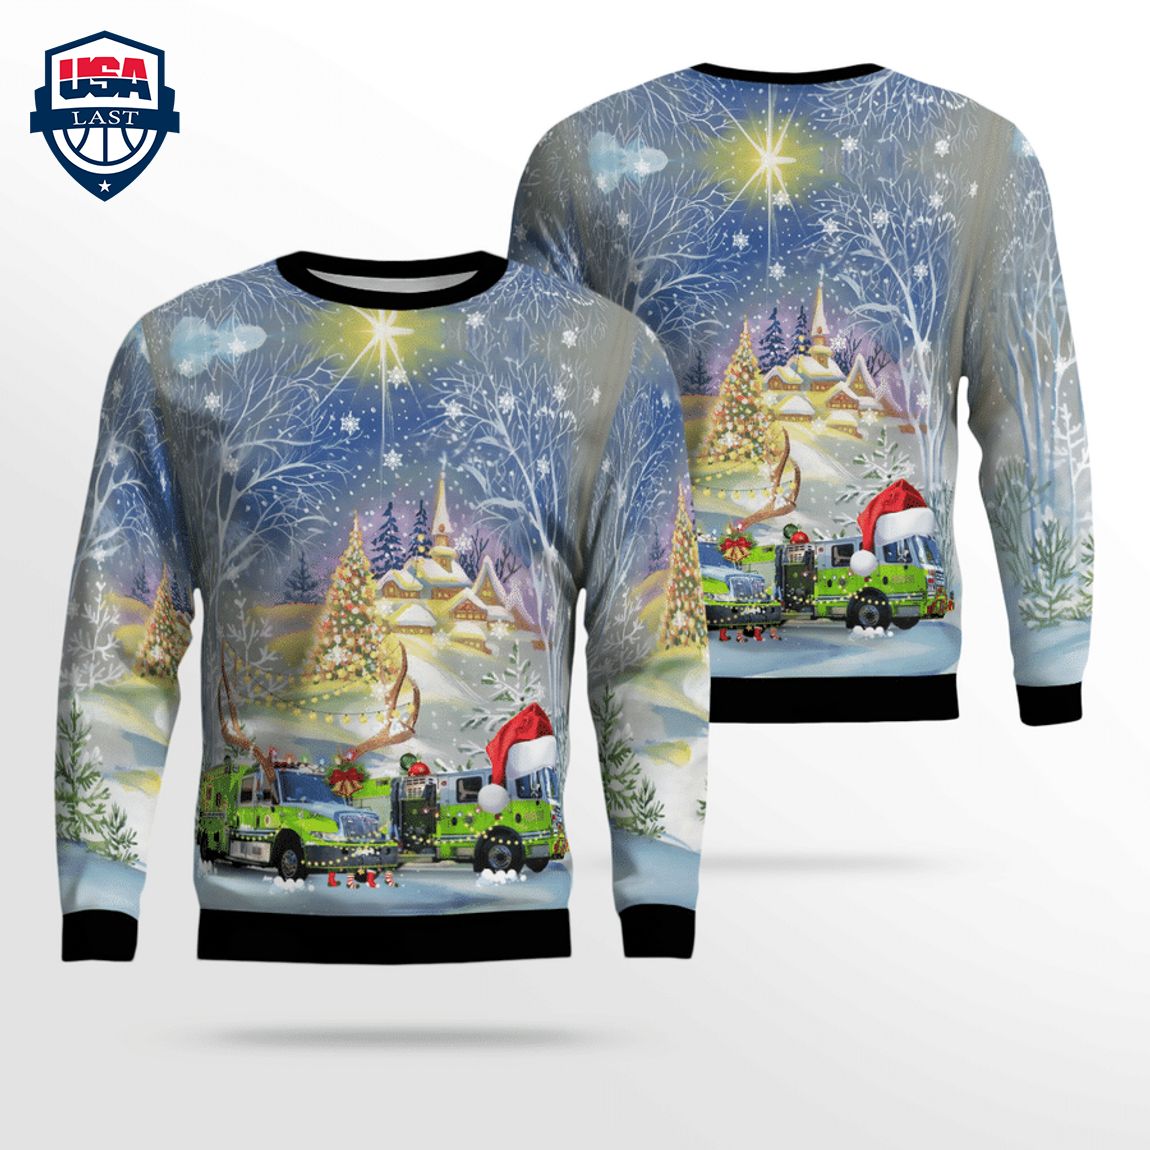 florida-miami-dade-fire-rescue-department-3d-christmas-sweater-1-lSm1L.jpg